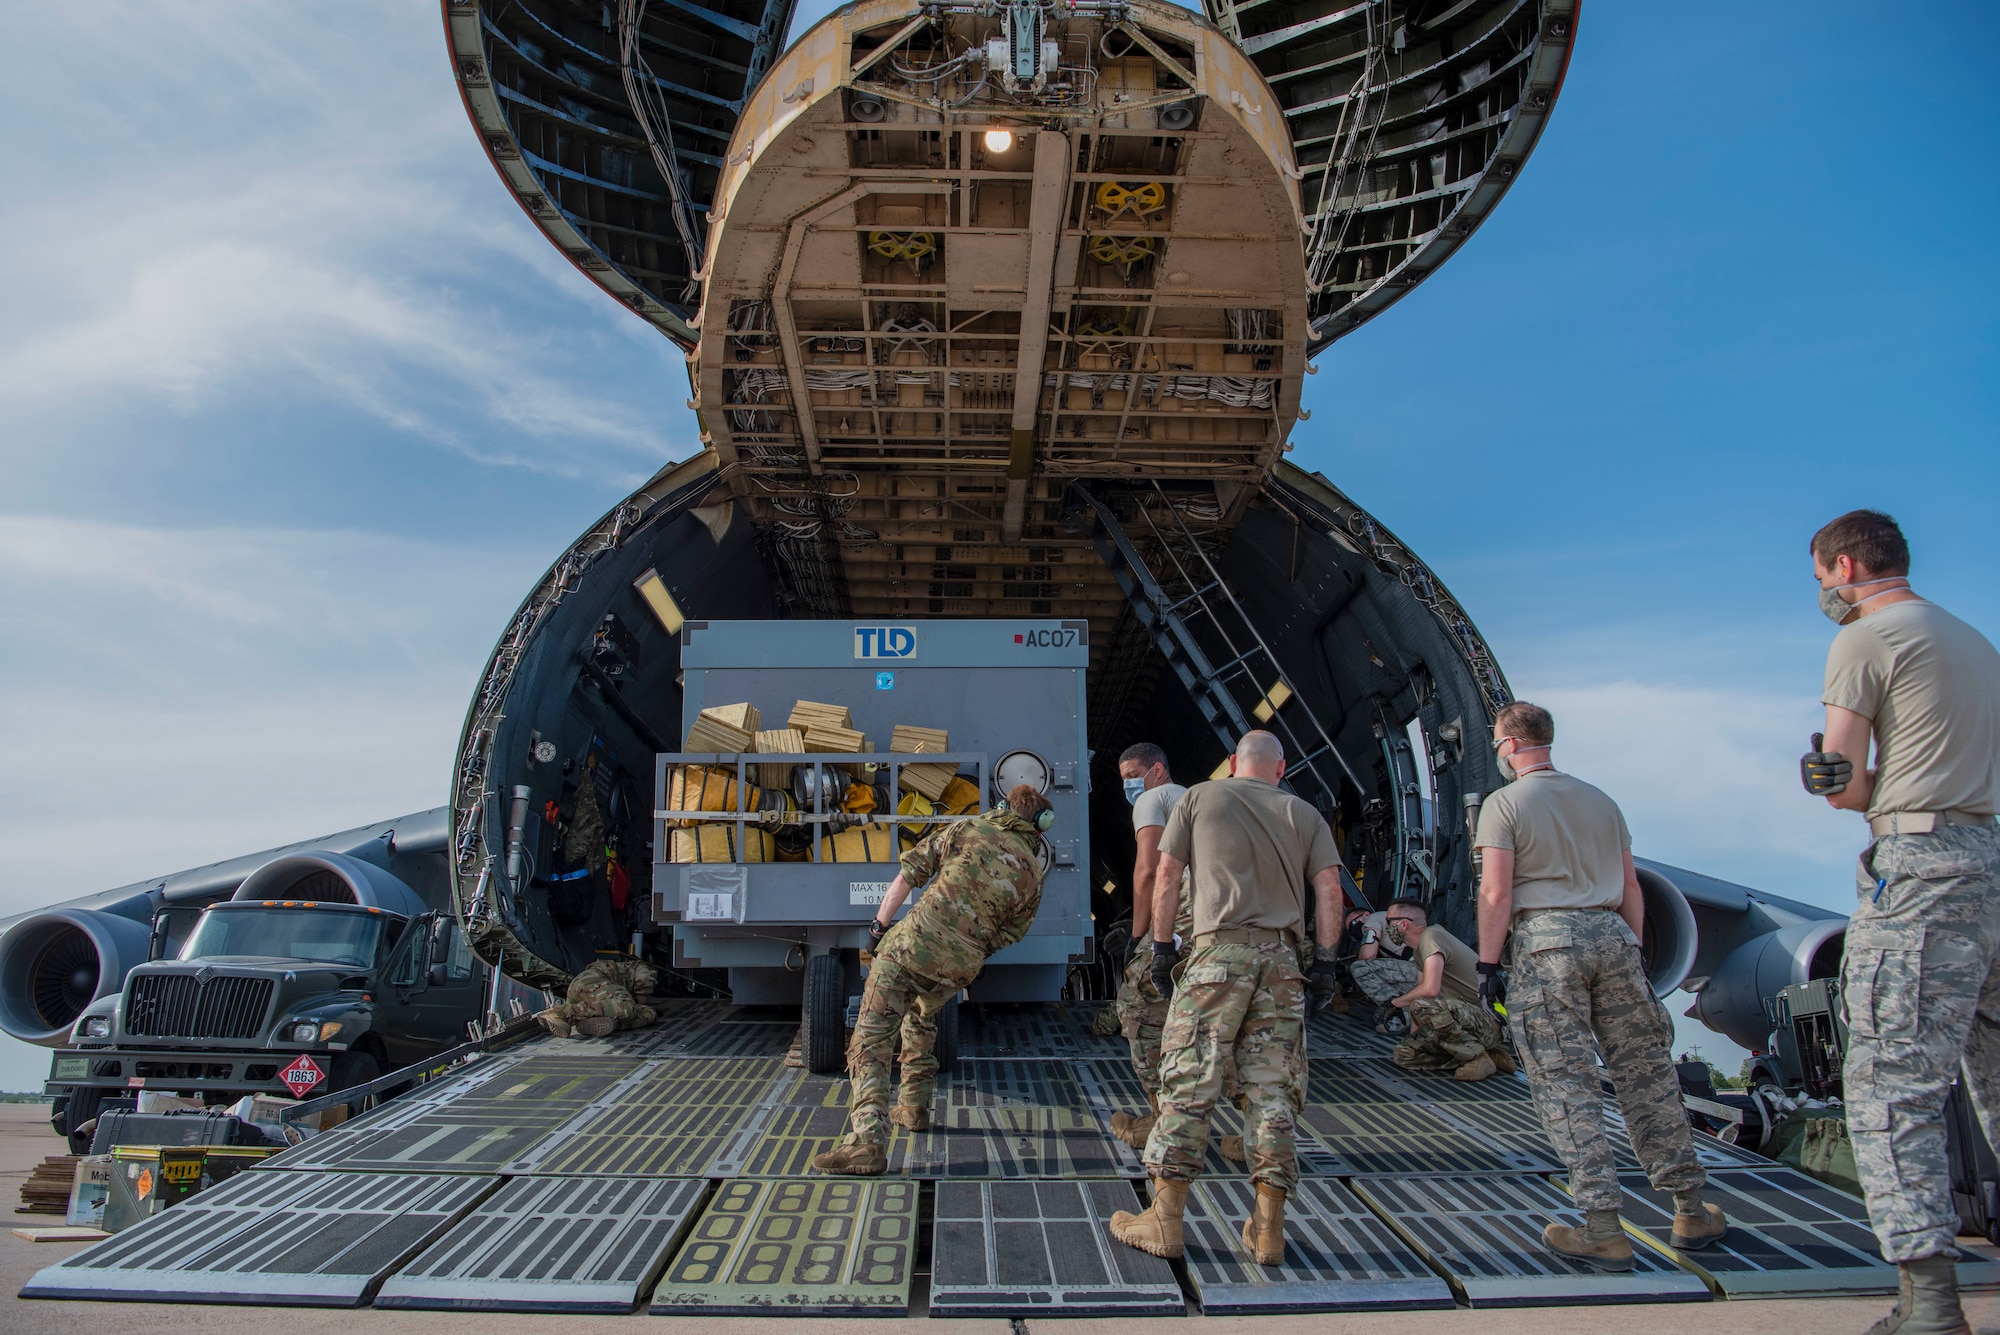 Airmen from the 7th Logistics Readiness Squadron load an air conditioning unit onto a C-5 Galaxy assigned to Dover Air Force Base, Delaware, at Dyess AFB, Texas, April 27, 2020. The C-5 transported Bomber Task Force equipment for four B-1B Lancers and approximately 200 Airmen to Andersen AFB, Guam. The BTF supports Pacific Air Forces' training efforts with allies, partners and joint forces; and strategic deterrence mission to reinforce the rules-based international order in the Indo-Pacific region (U.S. Air Force photo by Airman 1st Class Nicole Molignano)